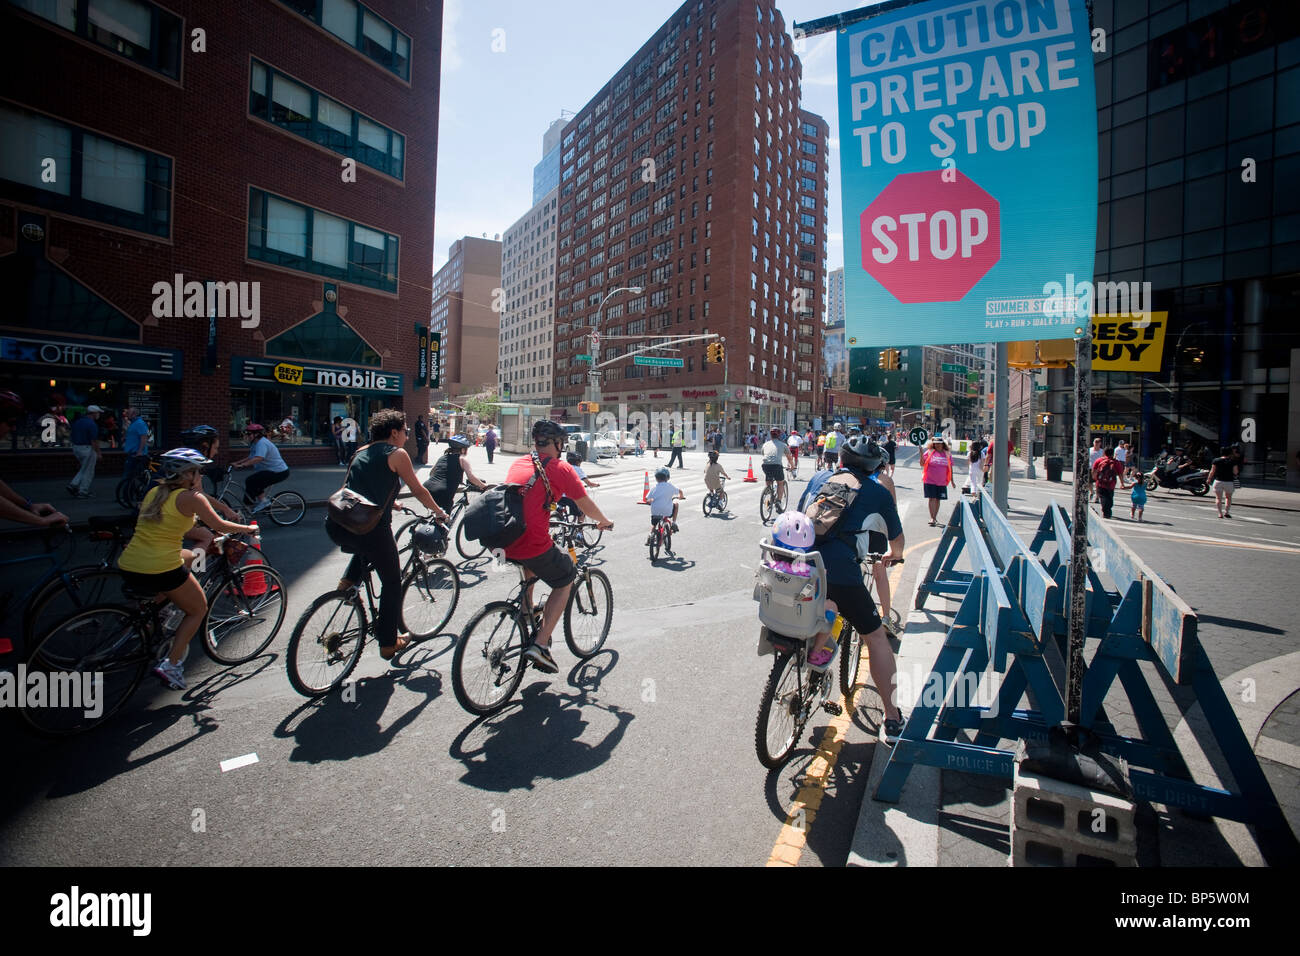 Bicycles prepare to stop at East 14th Street during the New York Summer Streets event Stock Photo